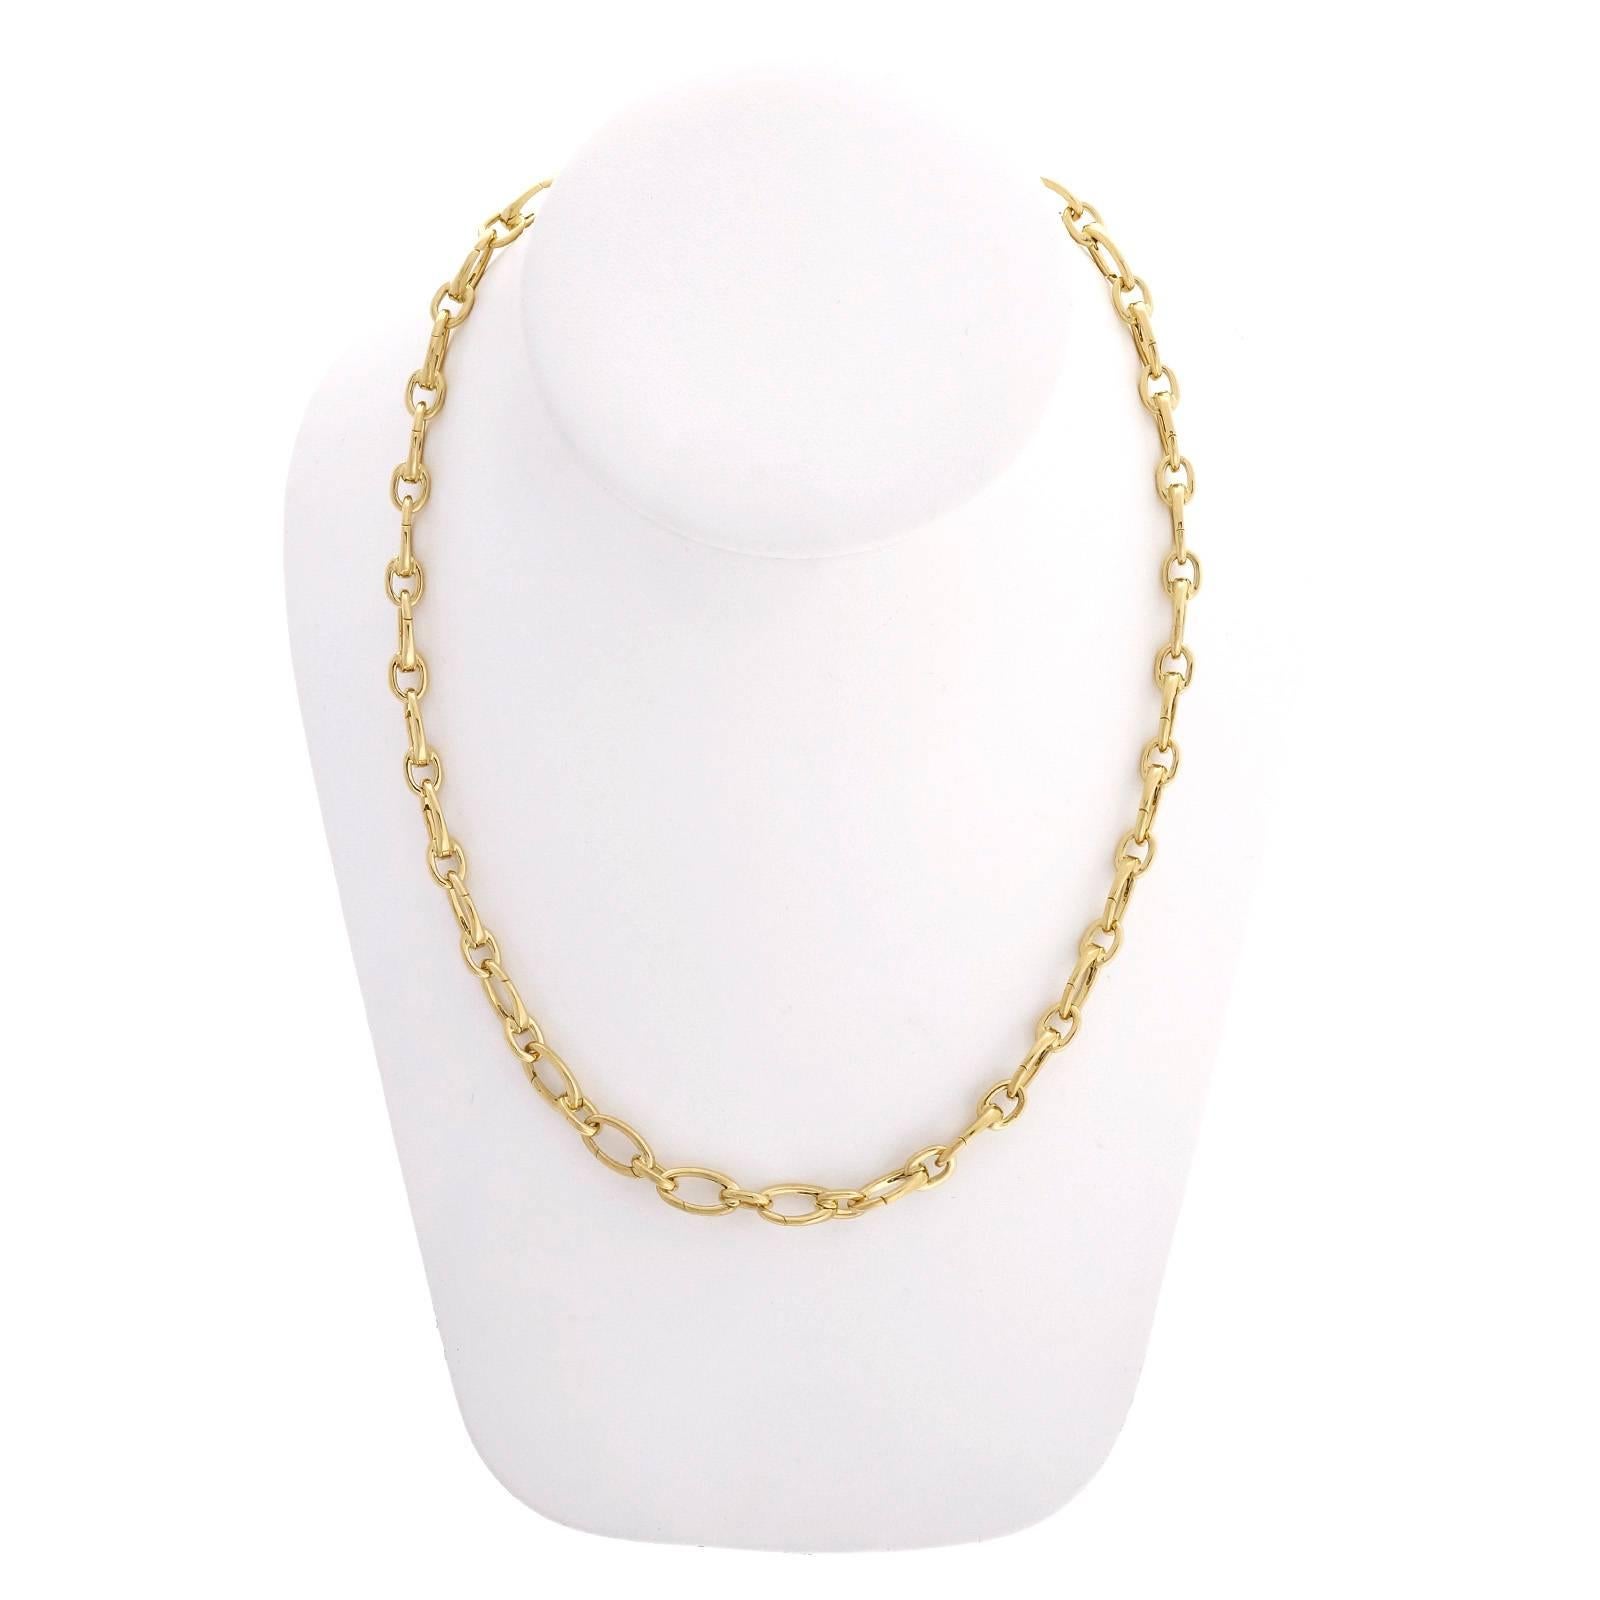 Authentic Tiffany & Co link clasp necklace 18 inches long. Links open and close. Can be shortened to any length or made into 2 bracelets.

14k yellow gold
39.9 grams
Tested: 18k
Stamped: 750
Hallmark: T+C Italy
Length: 18 inches
Width: